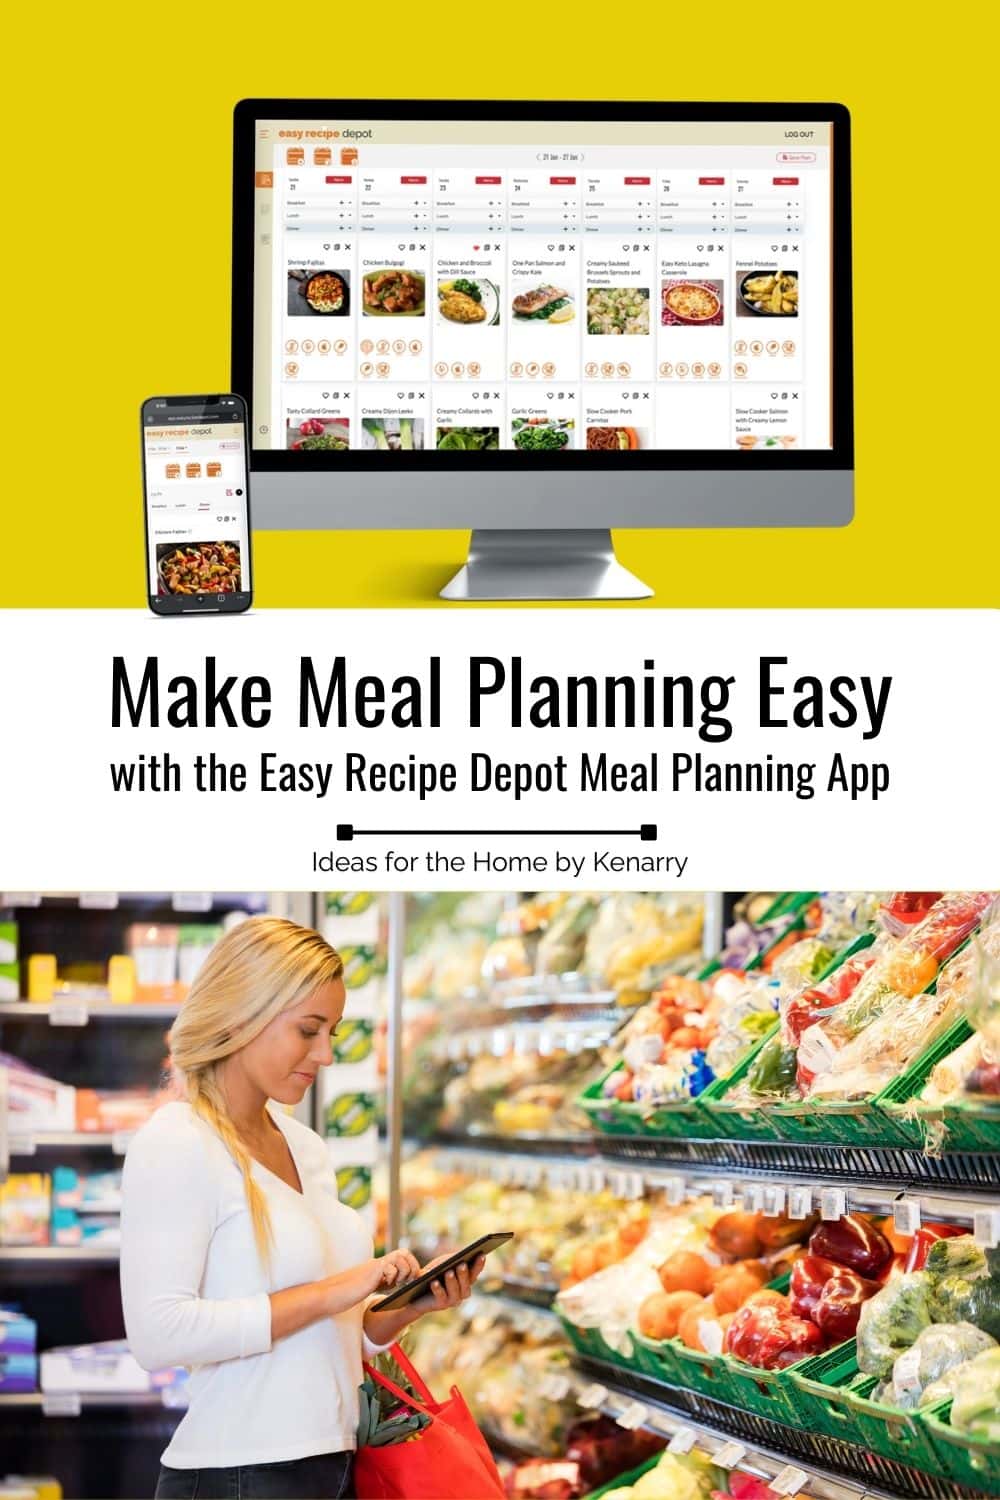 Make meal planning easy with the Easy Recipe Depot meal planning app.